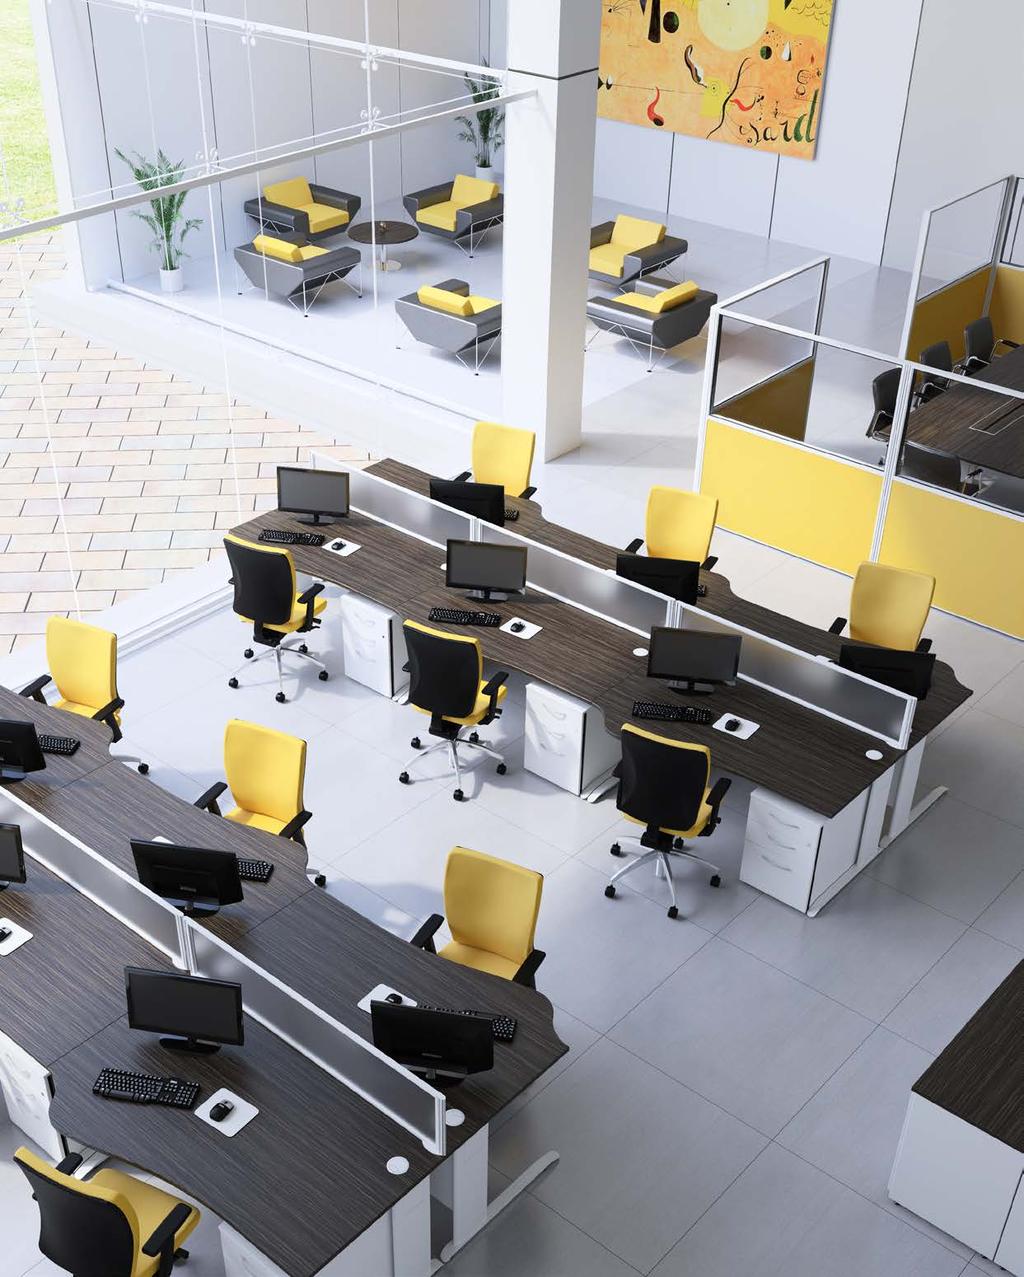 Welcome to flexible - office furniture and interiors Contents Flexible Office Furniture & Interiors specialise in providing interior design services and office furniture solutions for the workplace.